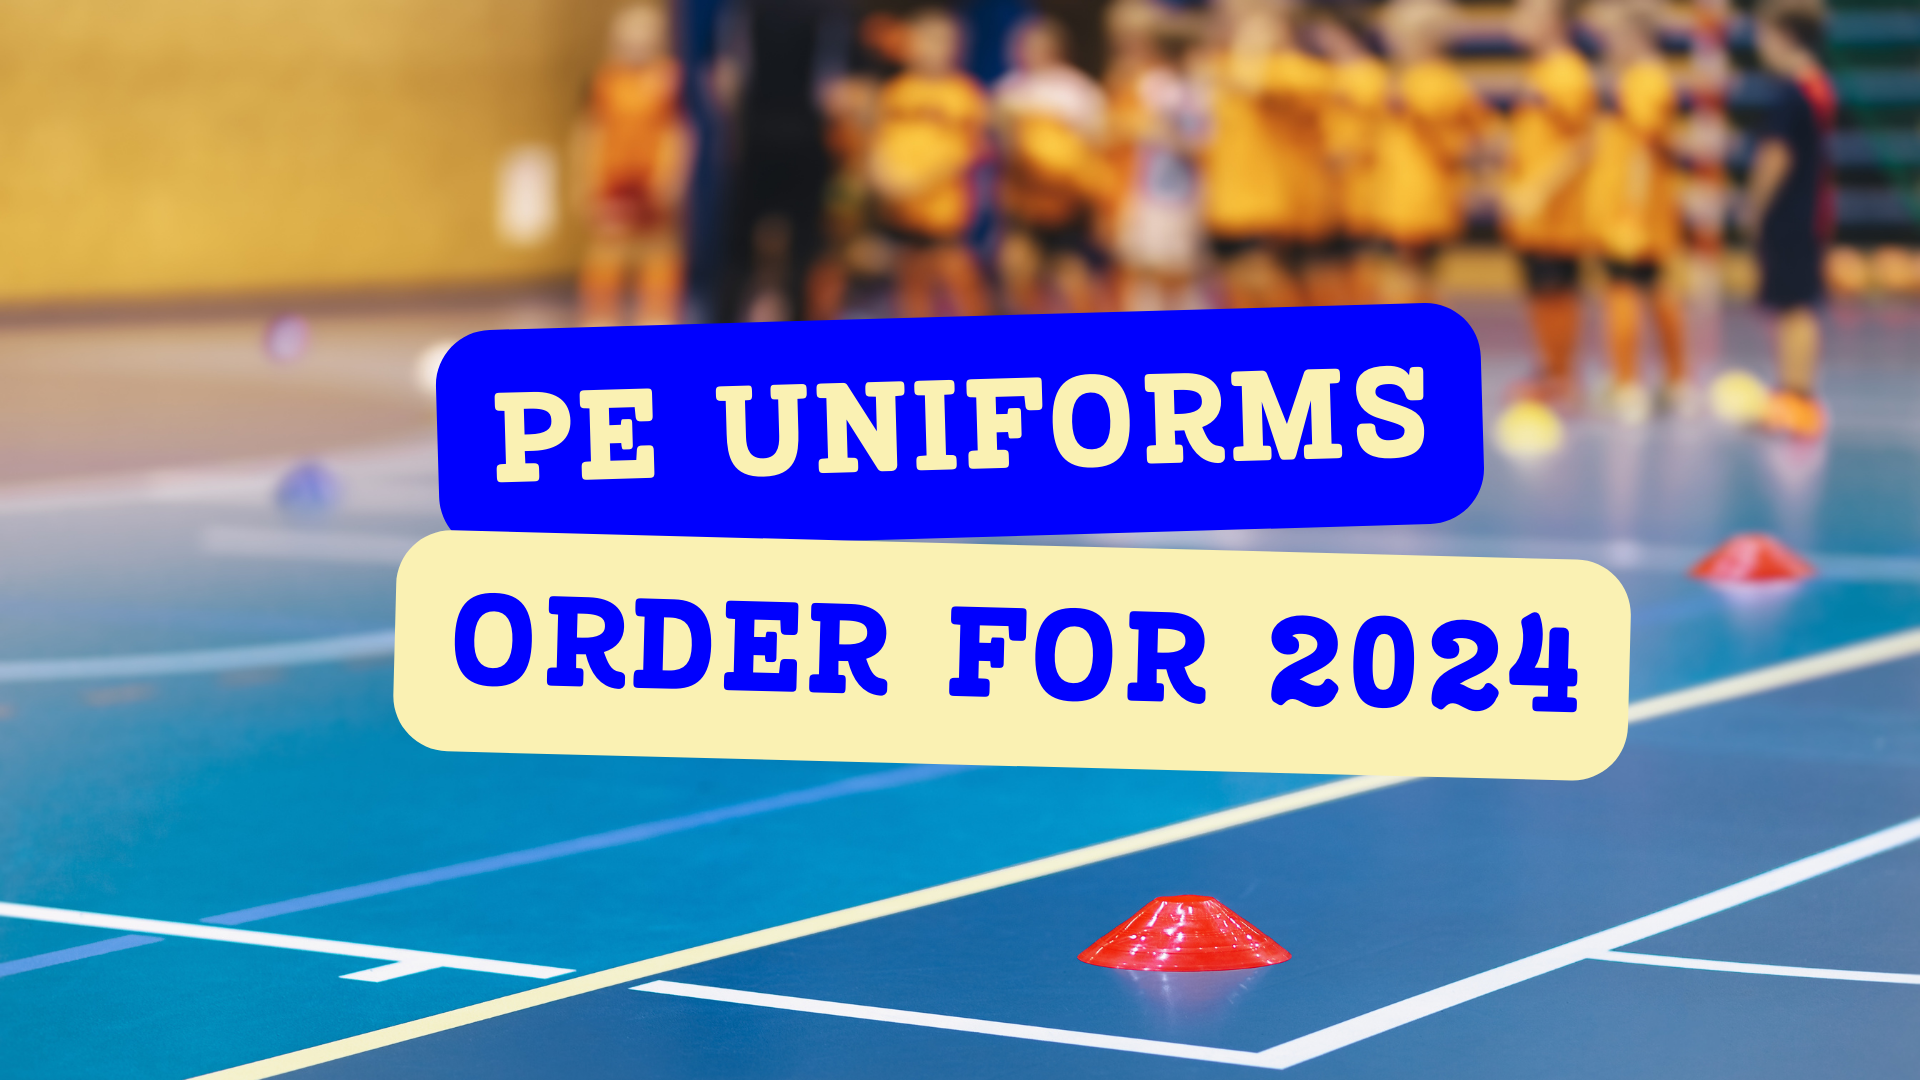 PE uniforms order for 2024